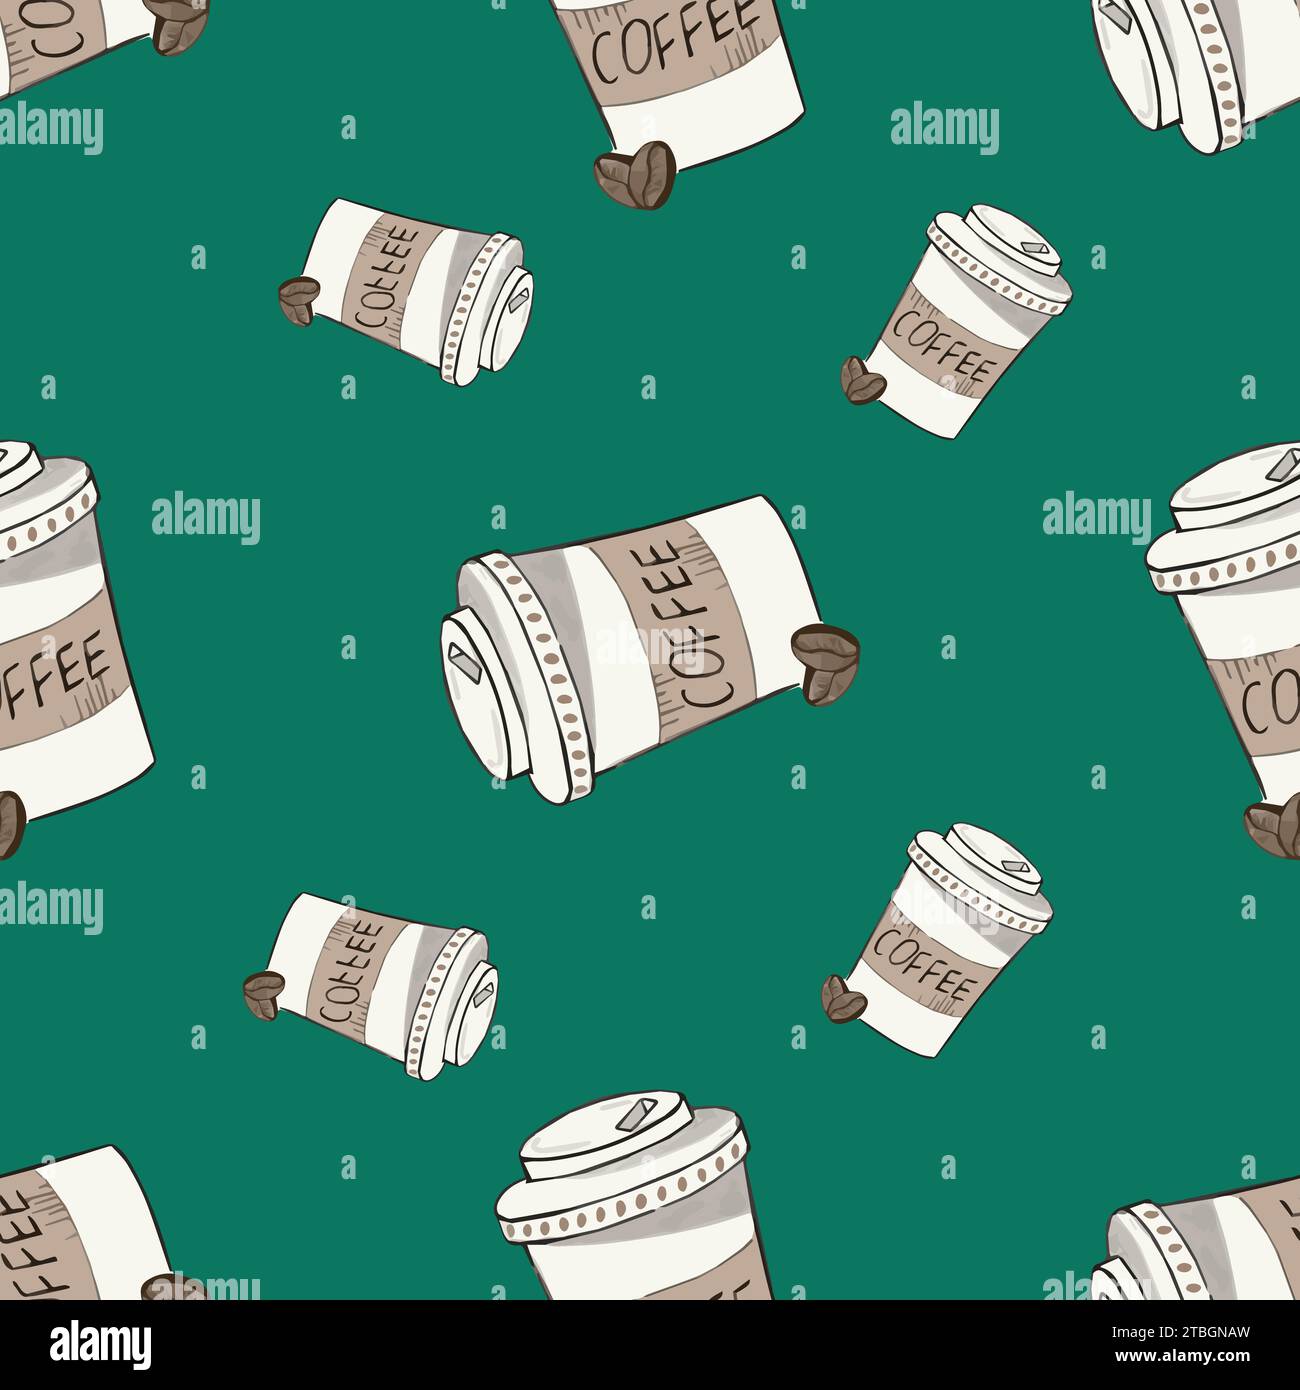 Coffee cup pattern. Vector seamless pattern with various